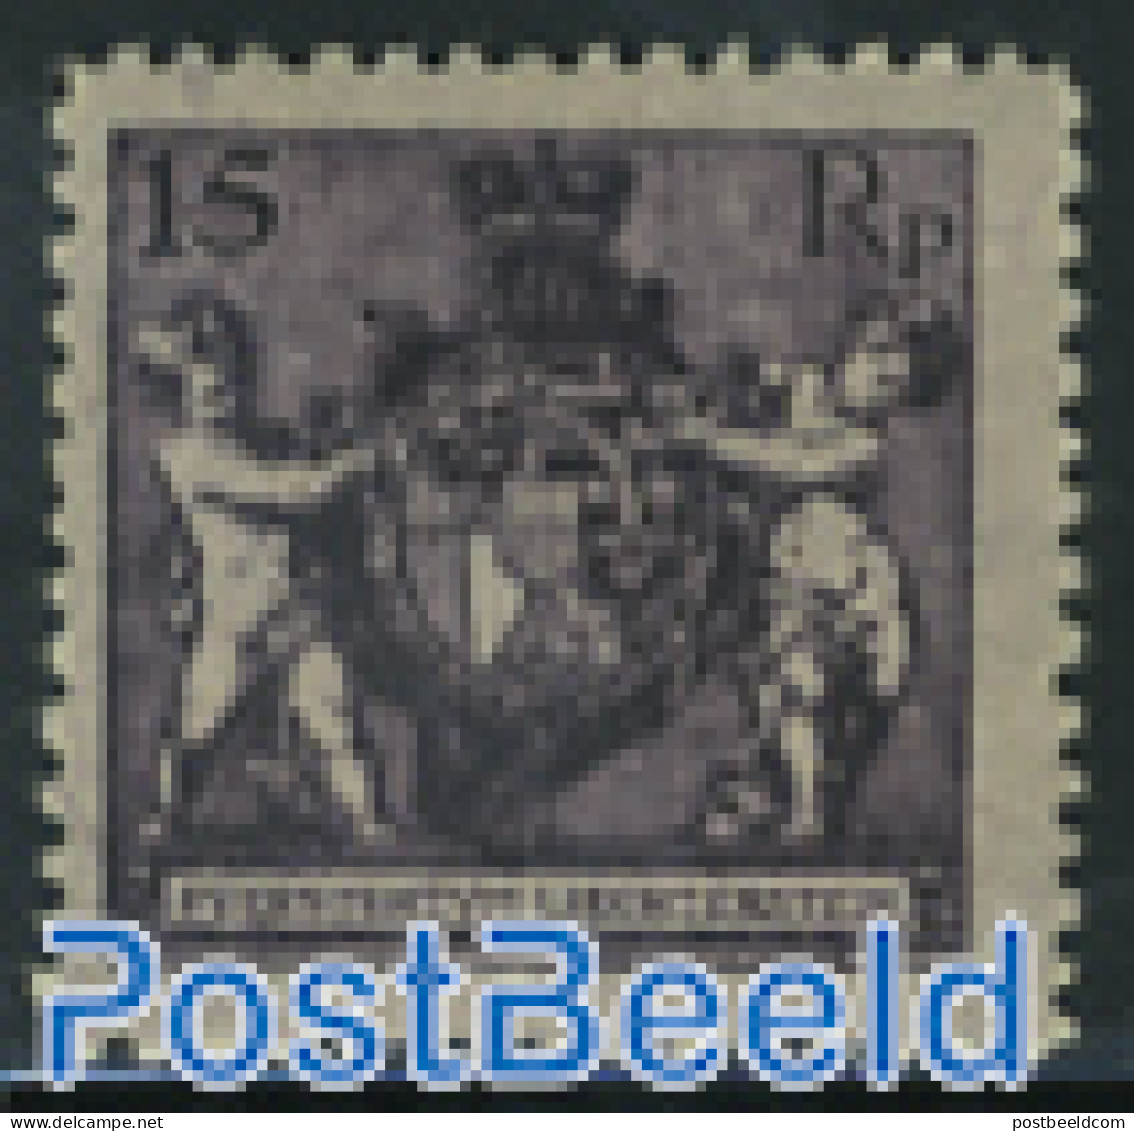 Liechtenstein 1921 15Rp, Perf. 12.5, Stamp Out Of Set, Unused (hinged), History - Coat Of Arms - Unused Stamps